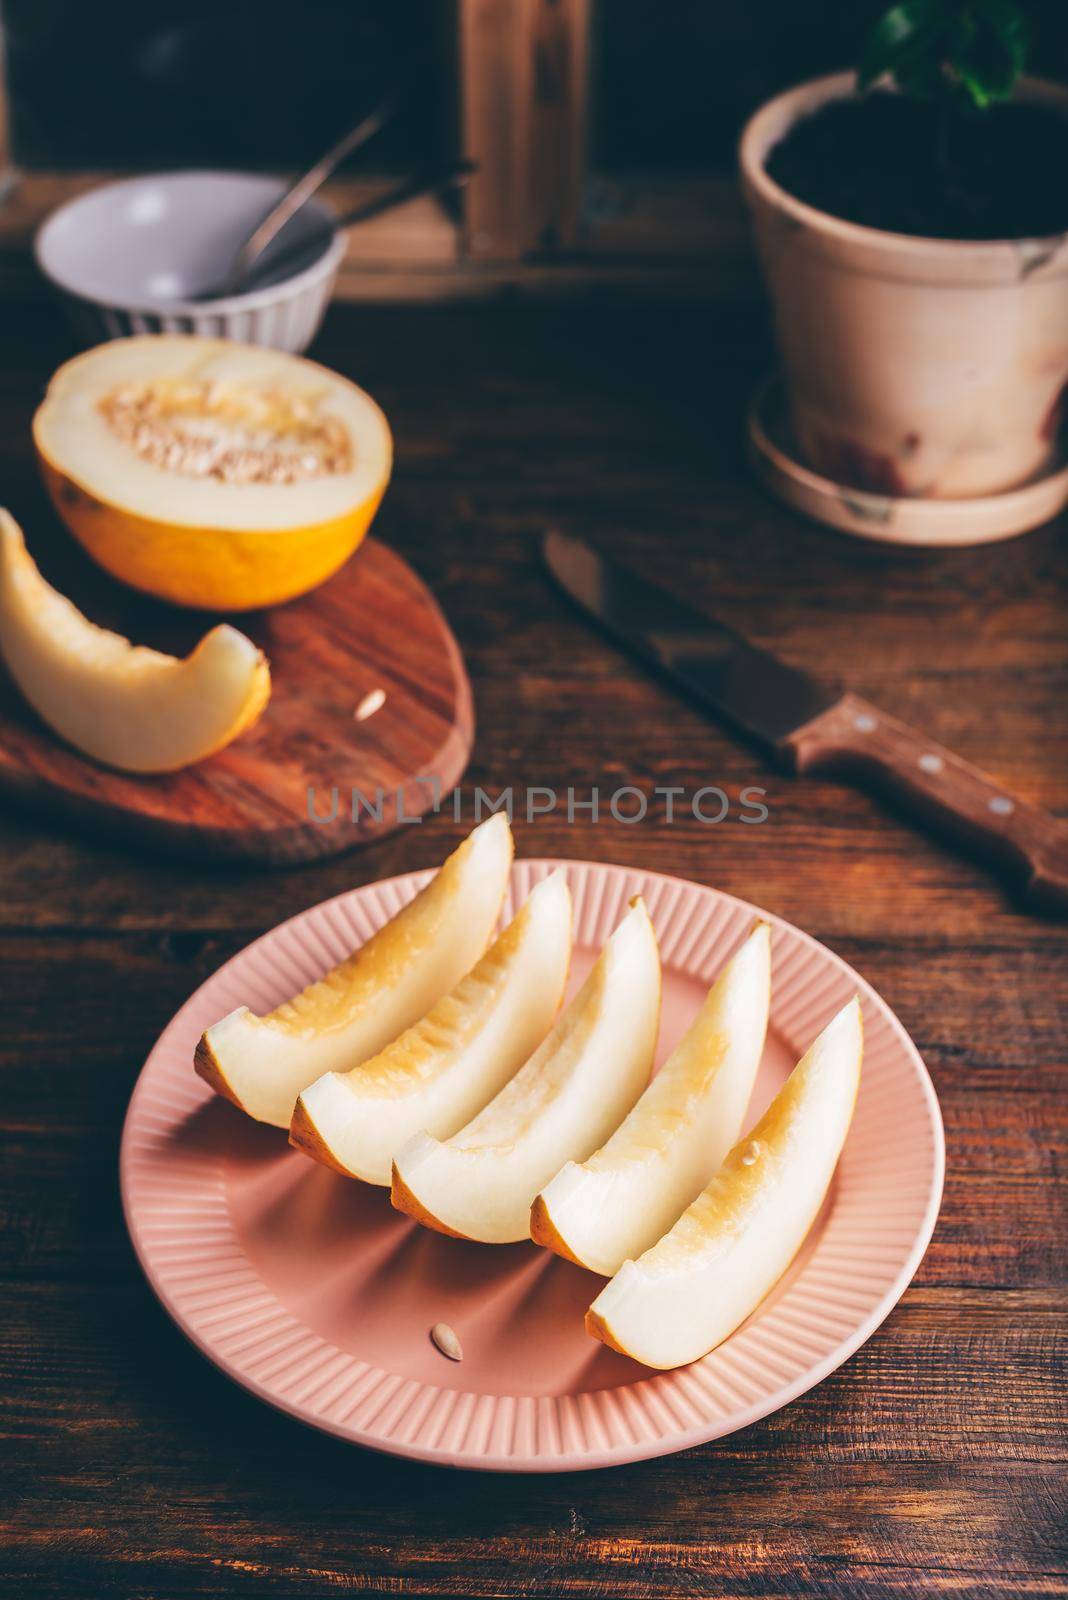 Sliced Sweet Yellow Melon on Plate over Wooden Surface